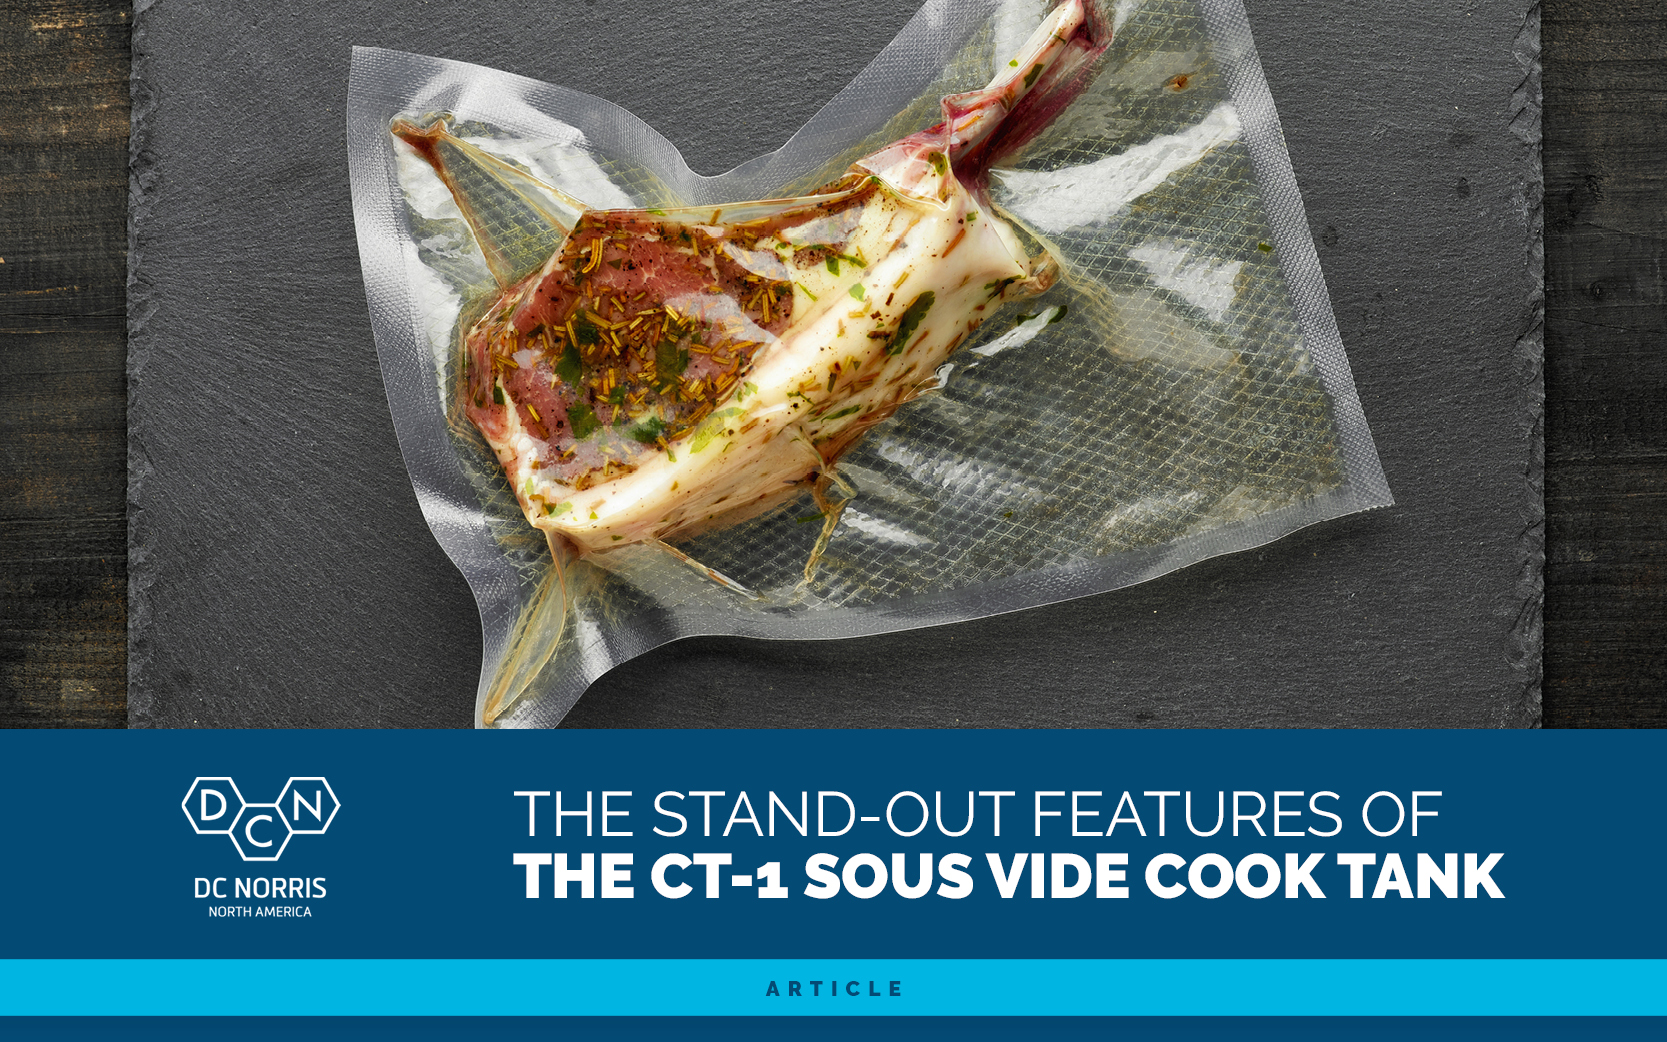 tomahawk steak sealed in sous vide packaging on a gray slate tile. Below it is the DC Norris North America logo next to a headline that reads: The Standout Features of the CT-1 Sous Vide Cook Tank